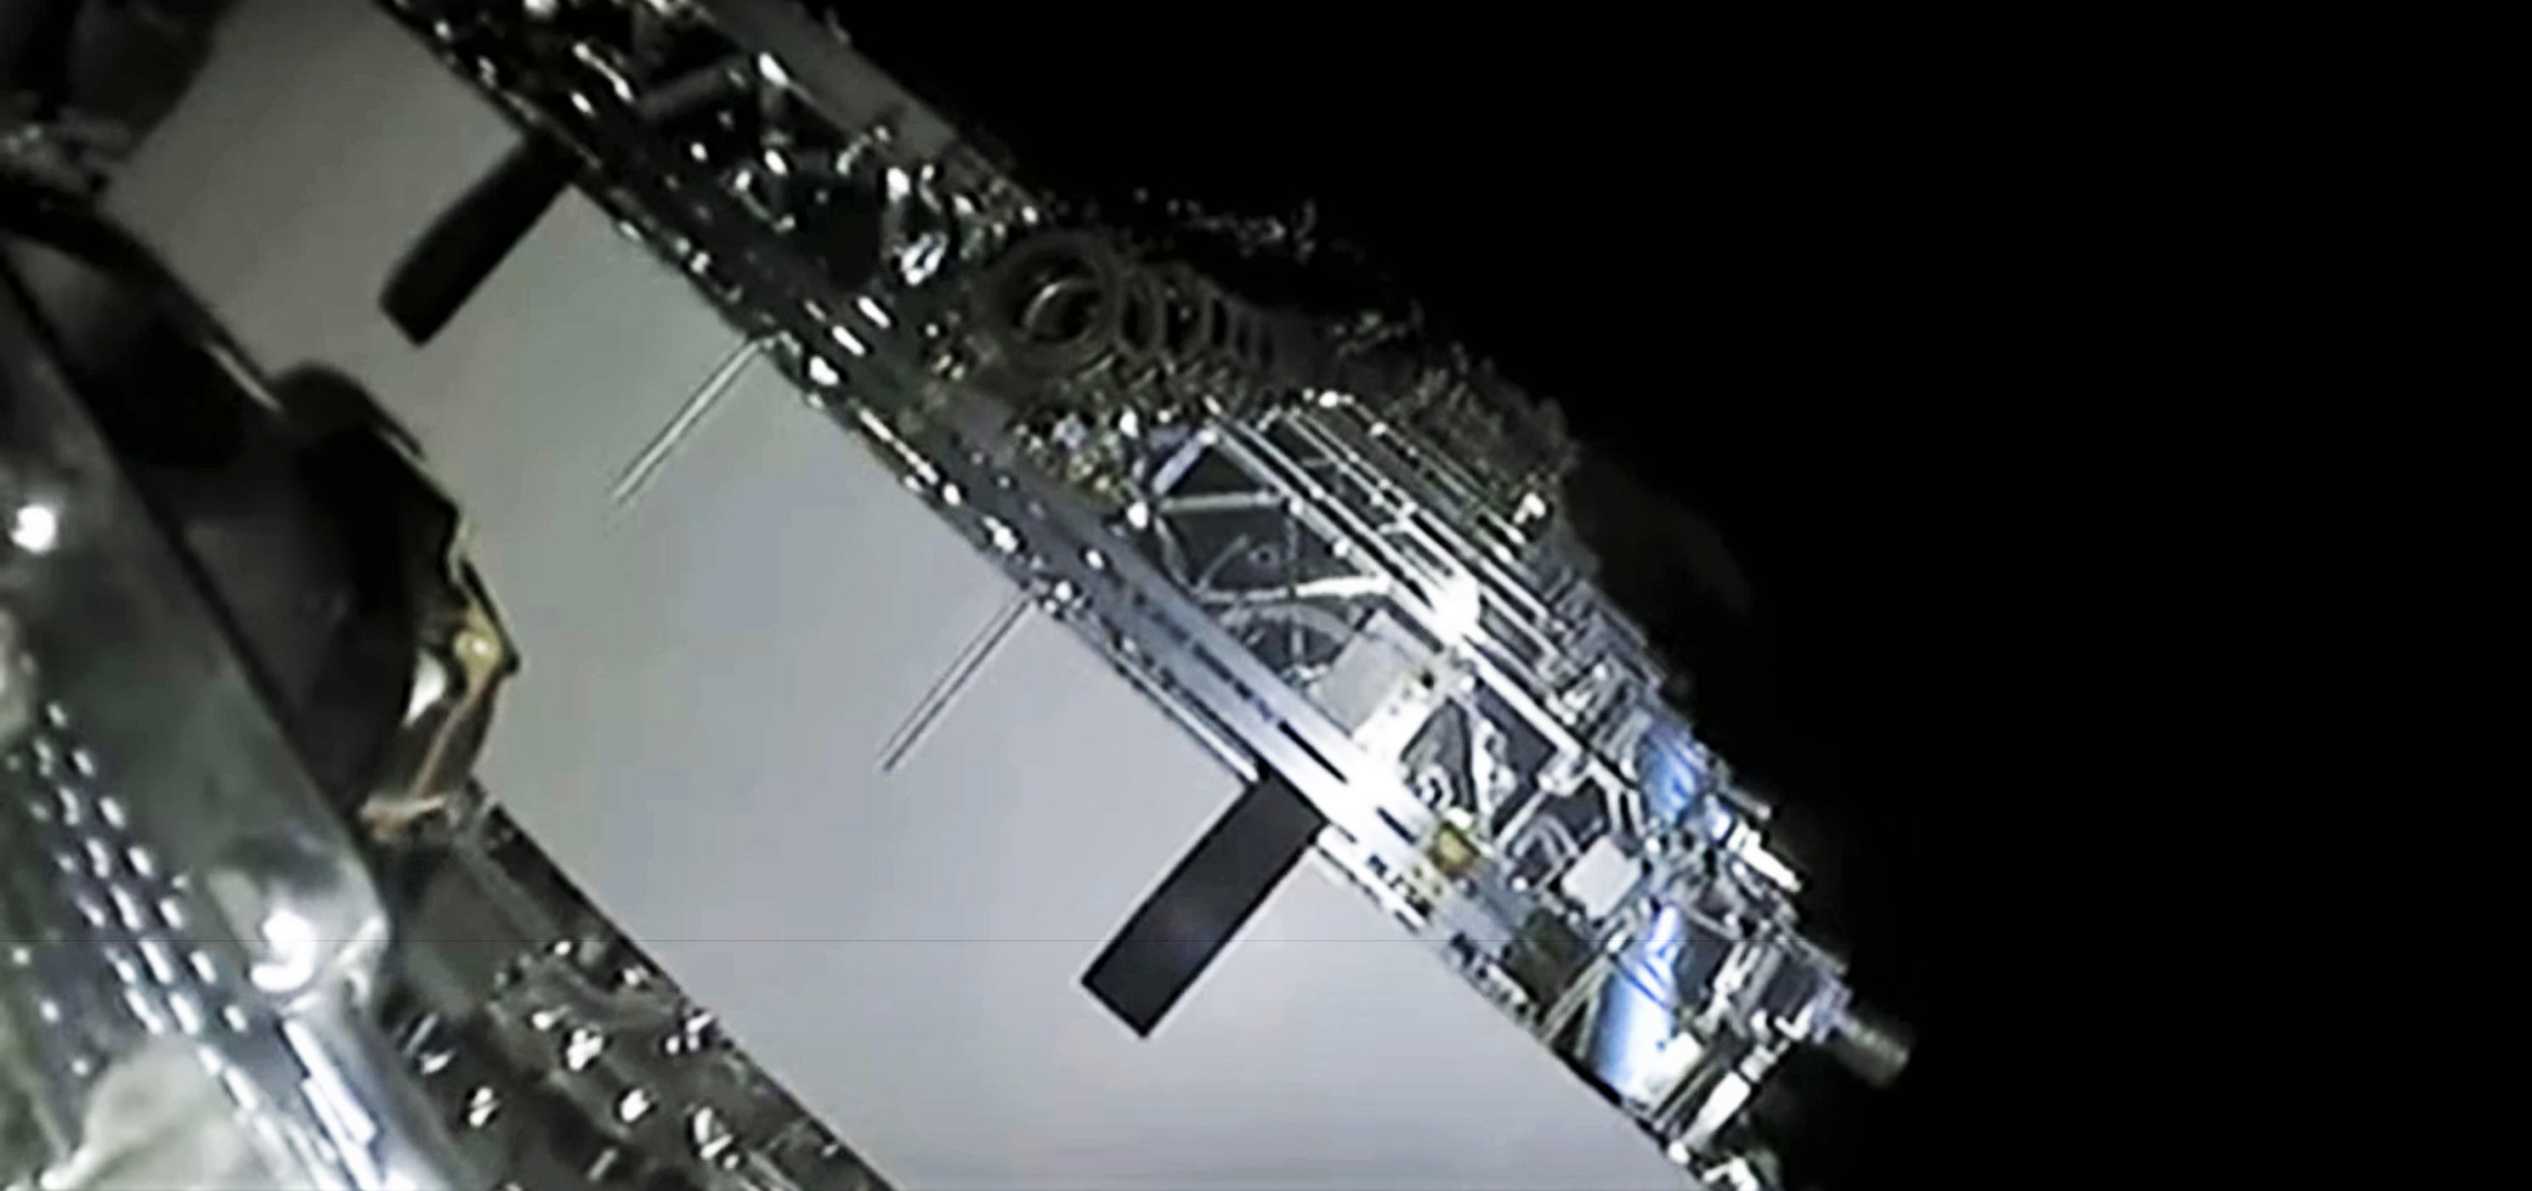 Starlink-8 Falcon 9 B1049 LC-40 060320 webcast (SpaceX) satellite deploy 1 crop (c)